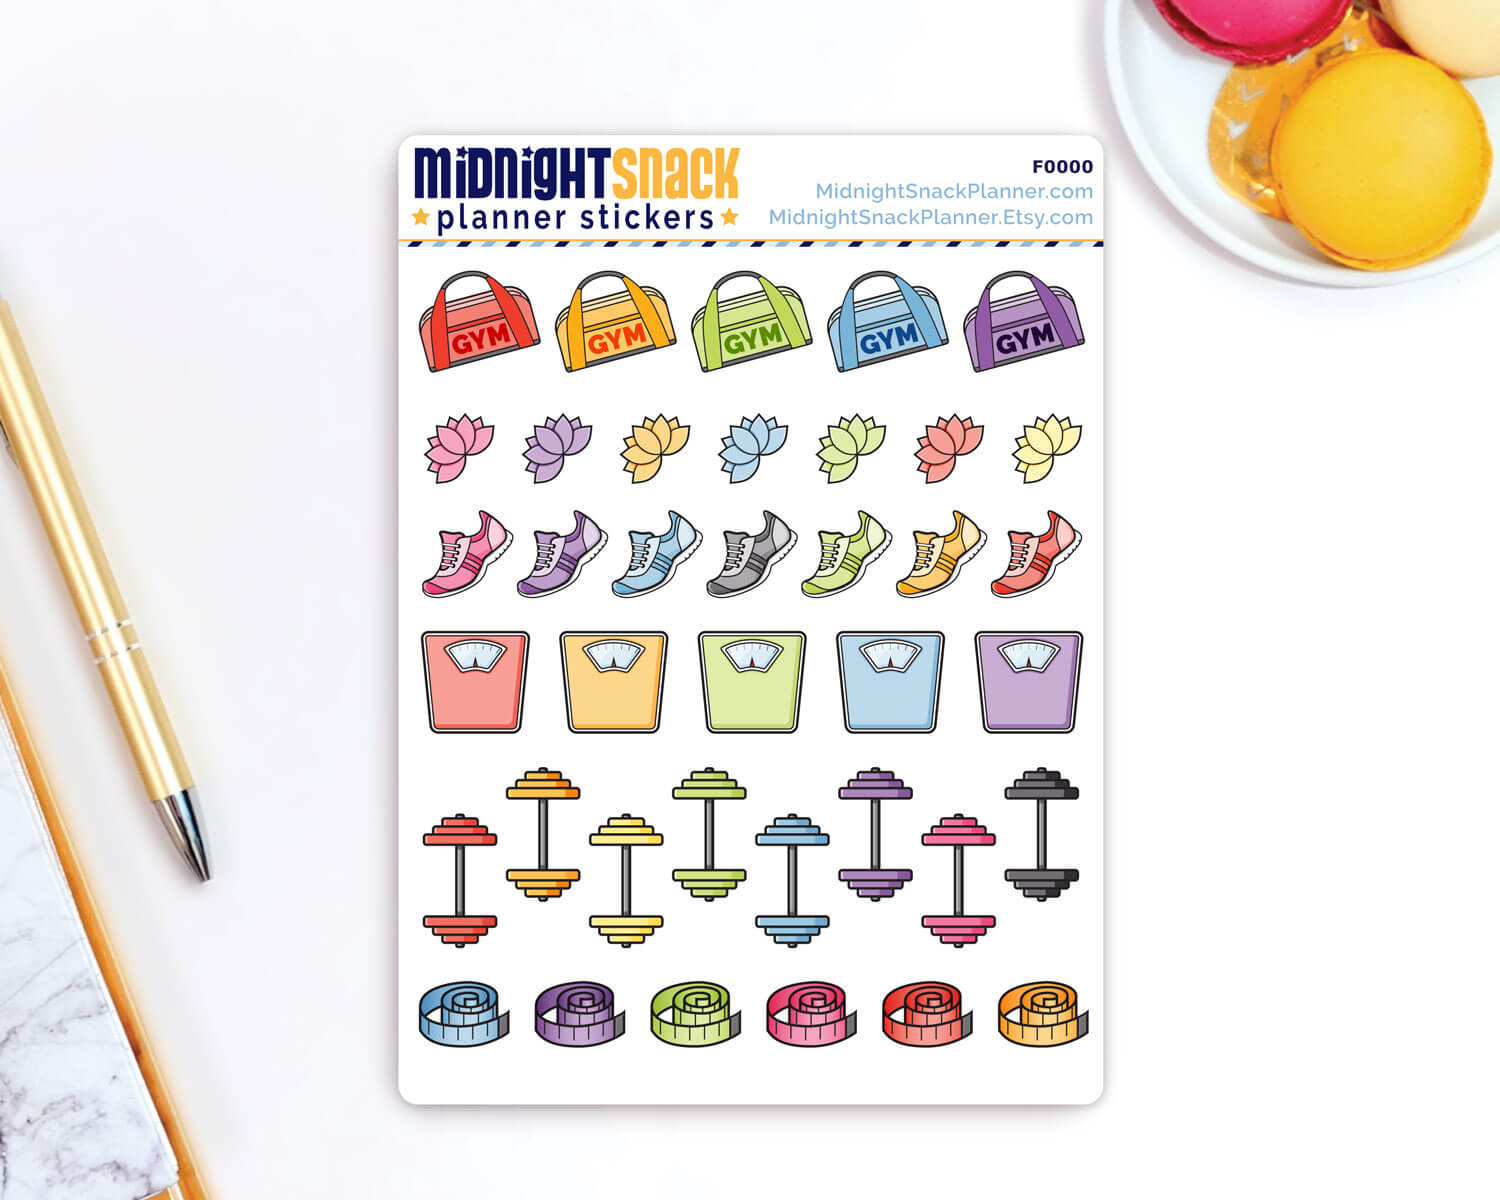 Exercise and Weight Loss Sampler Planner Stickers from Midnight Snack Planner